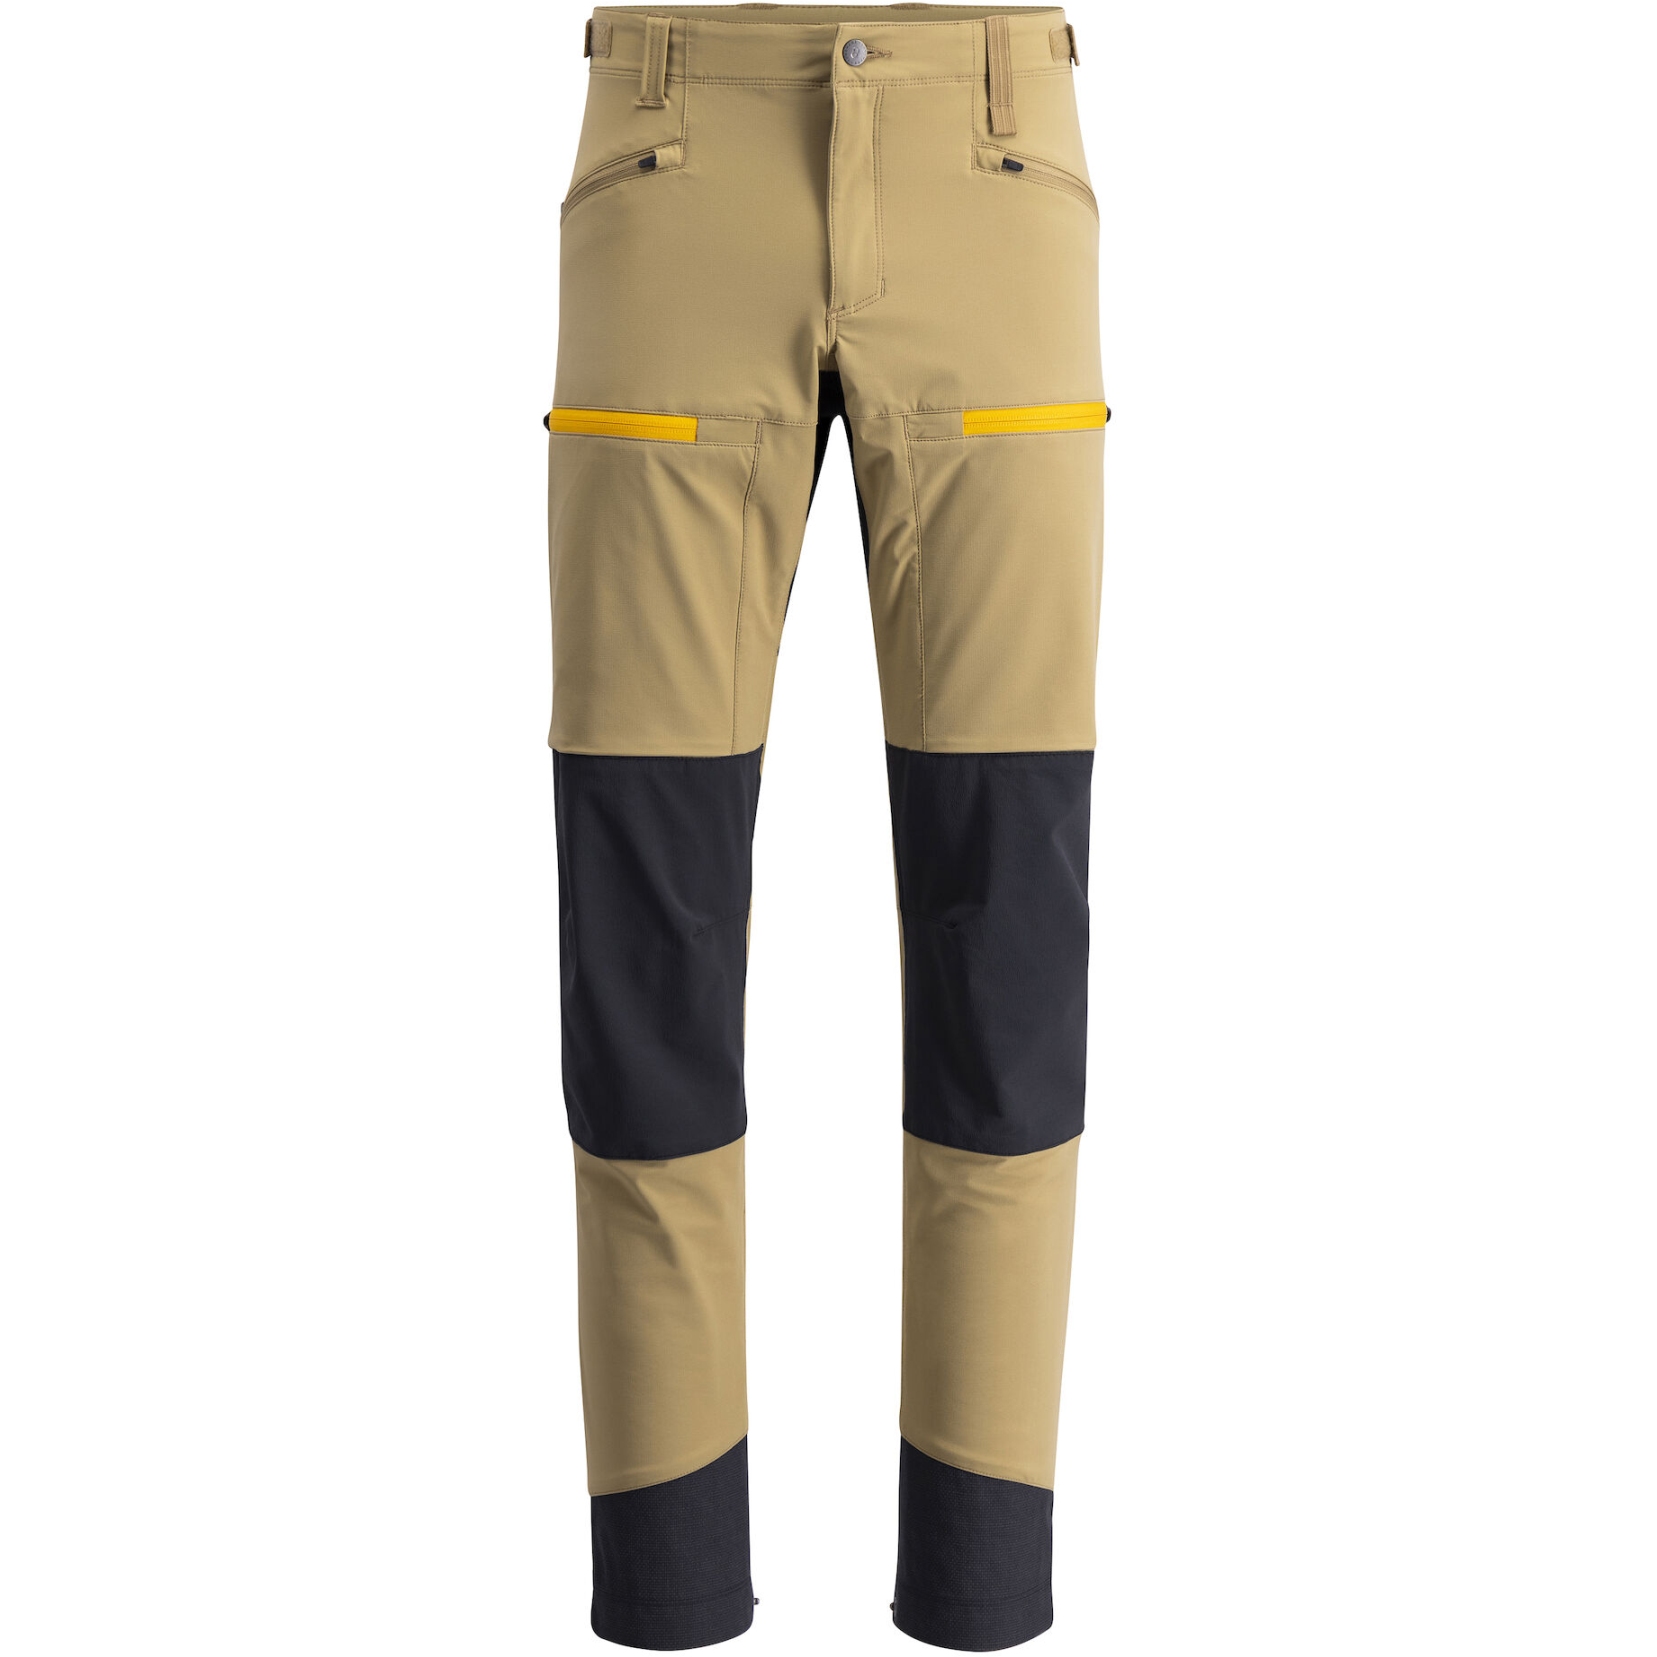 Picture of Lundhags Padje Stretch Pants Men - Dark Sand/Charcoal 02201